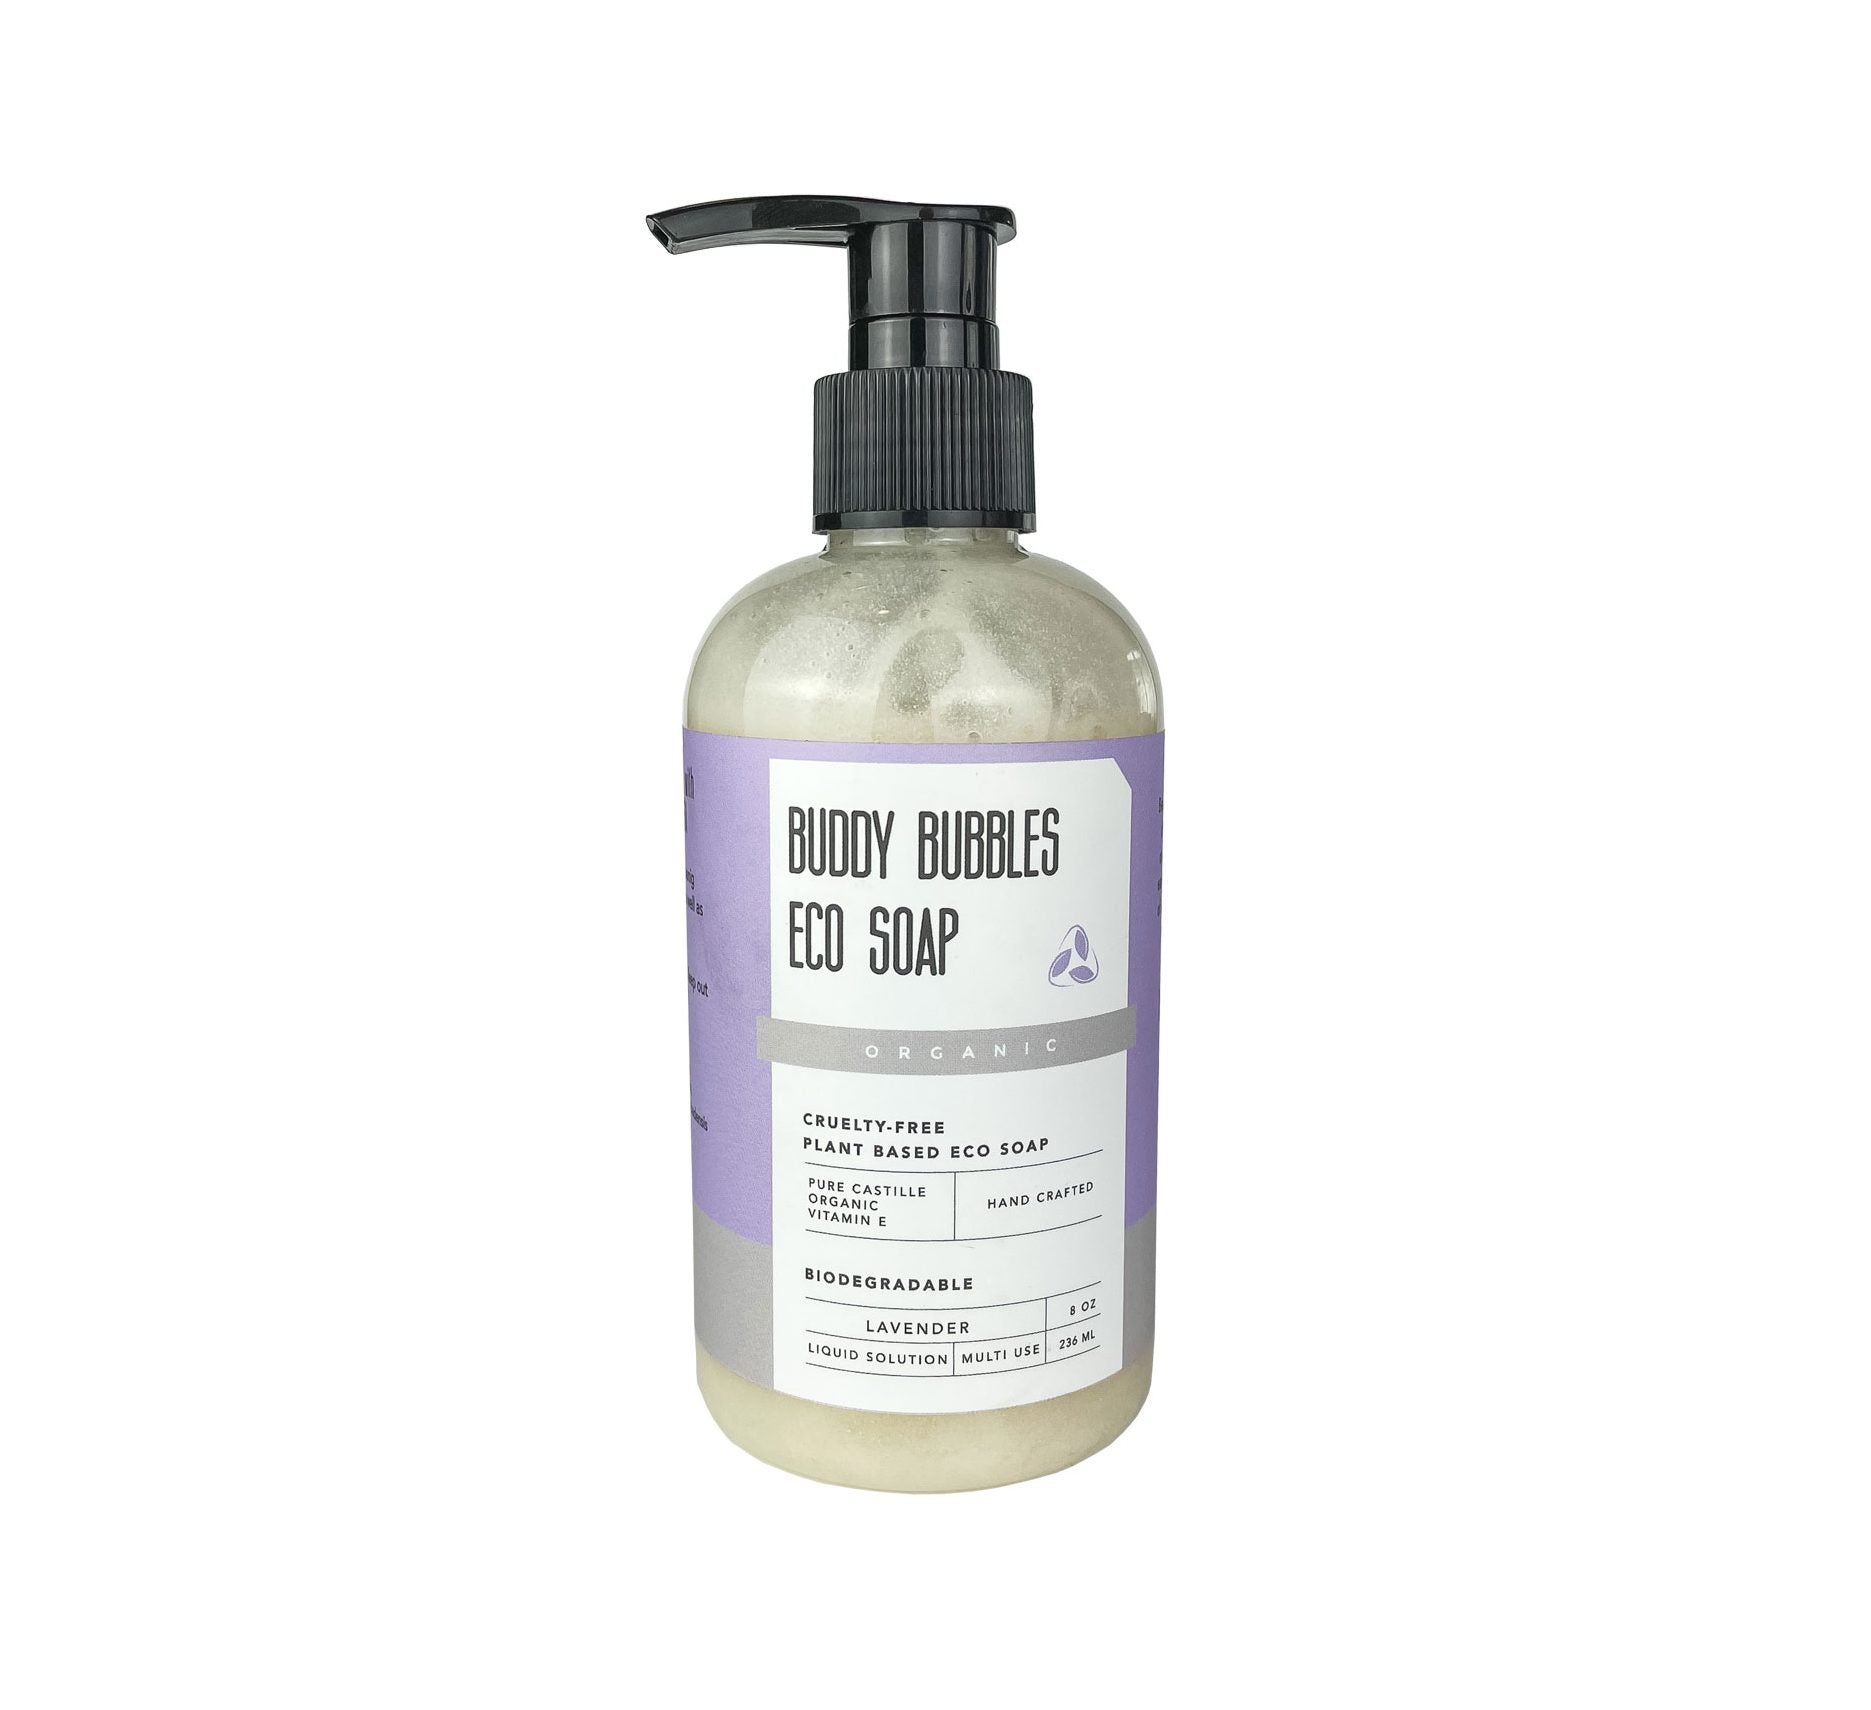 Buddy Bubbles Eco Soap for washing teddy bears and other stuffed animals. Lavender scented in 8 oz pump bottle.